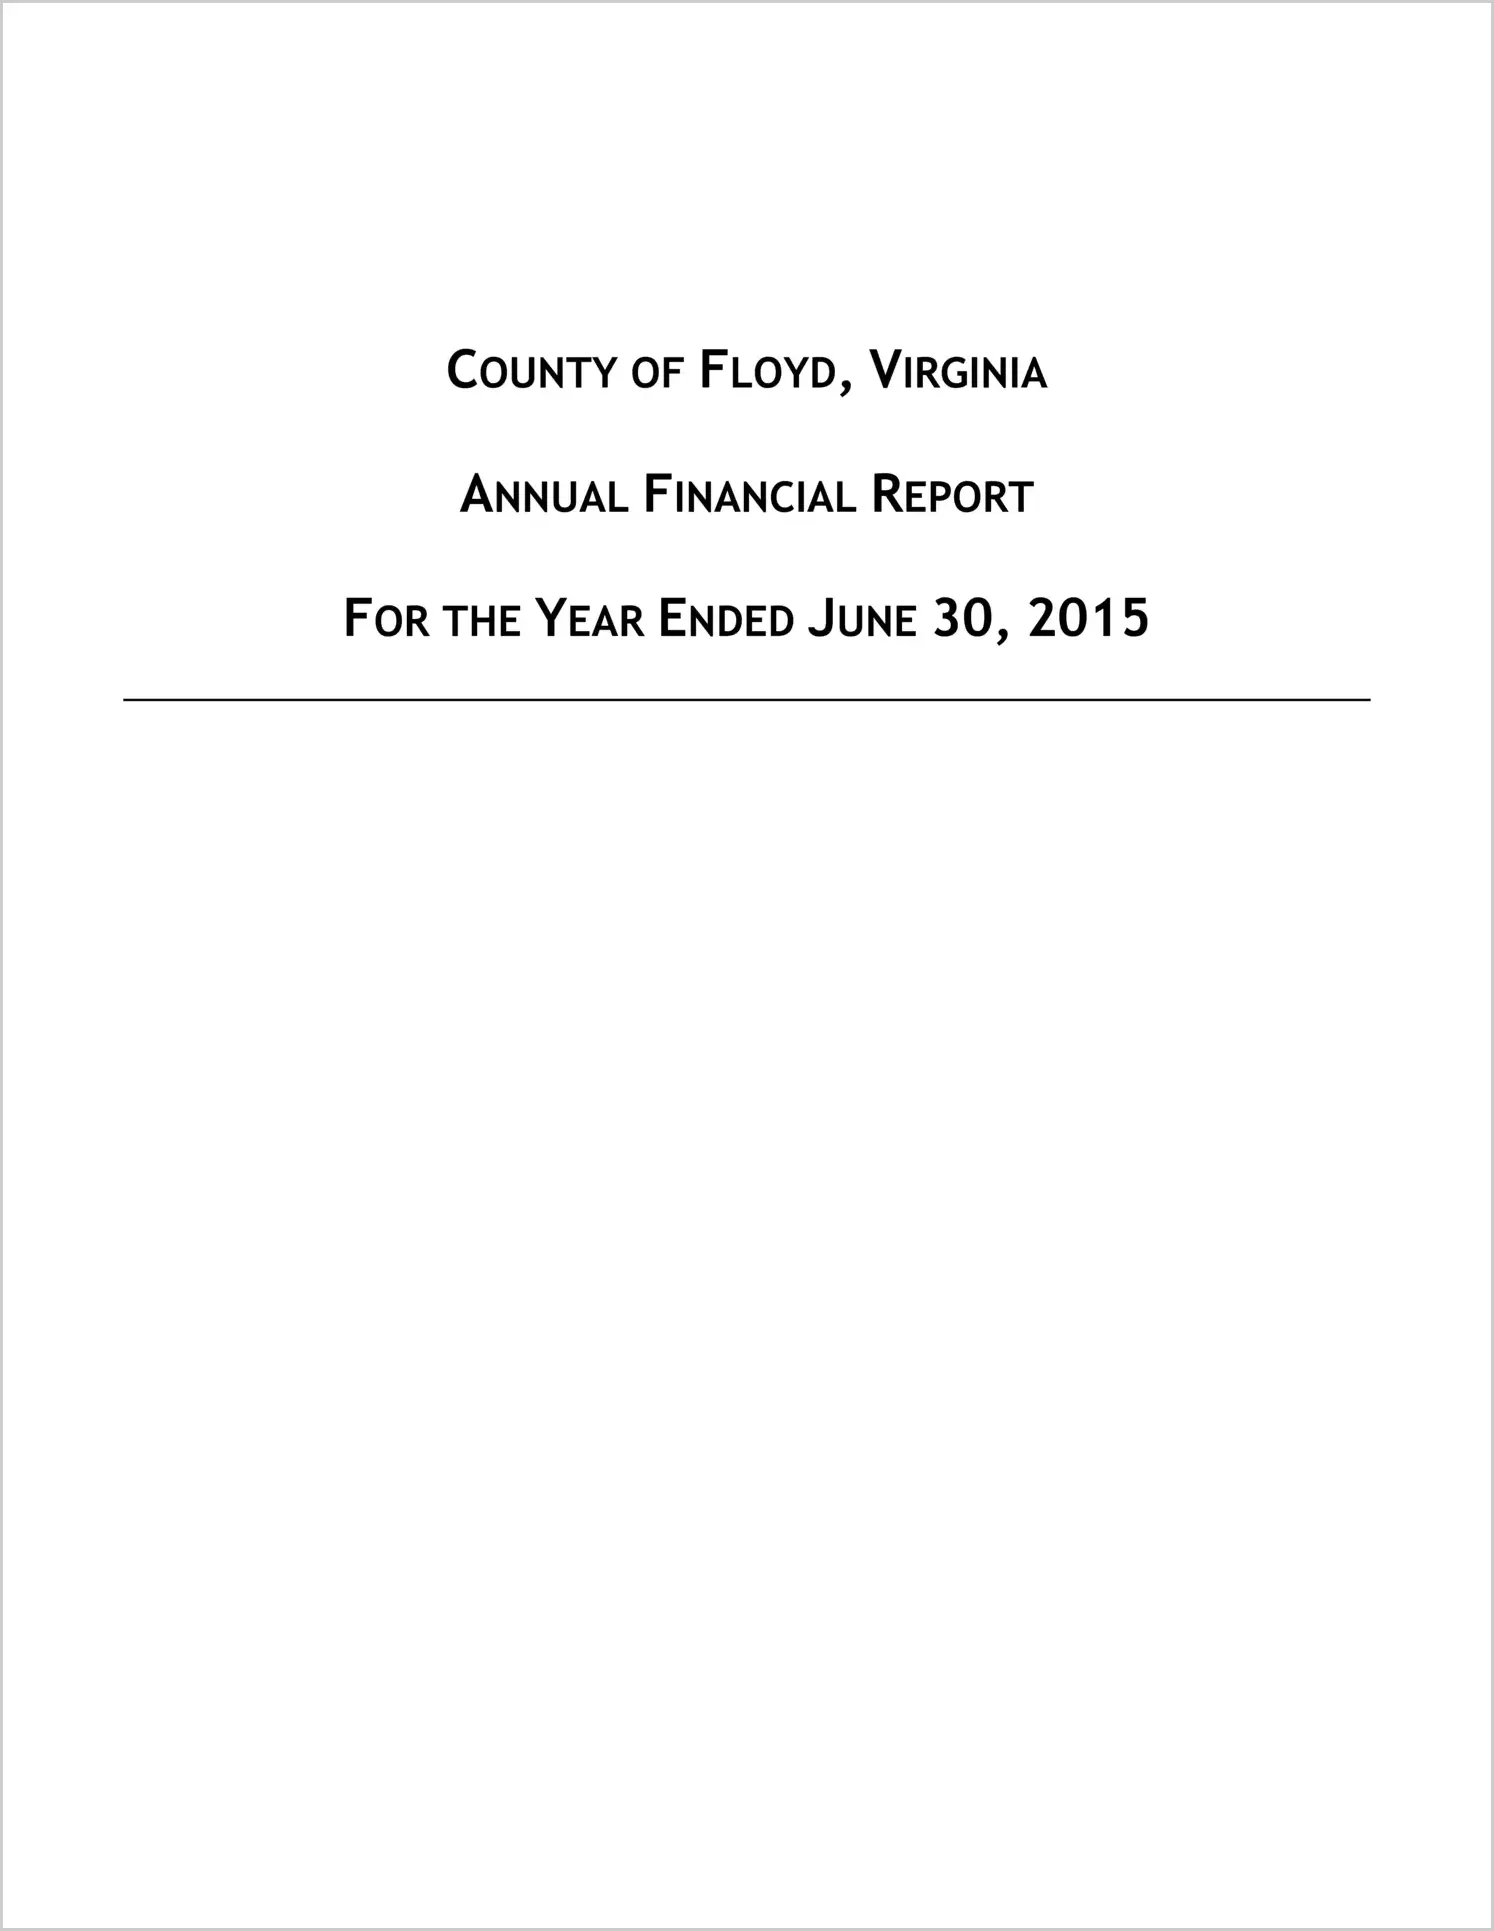 2015 Annual Financial Report for County of Floyd